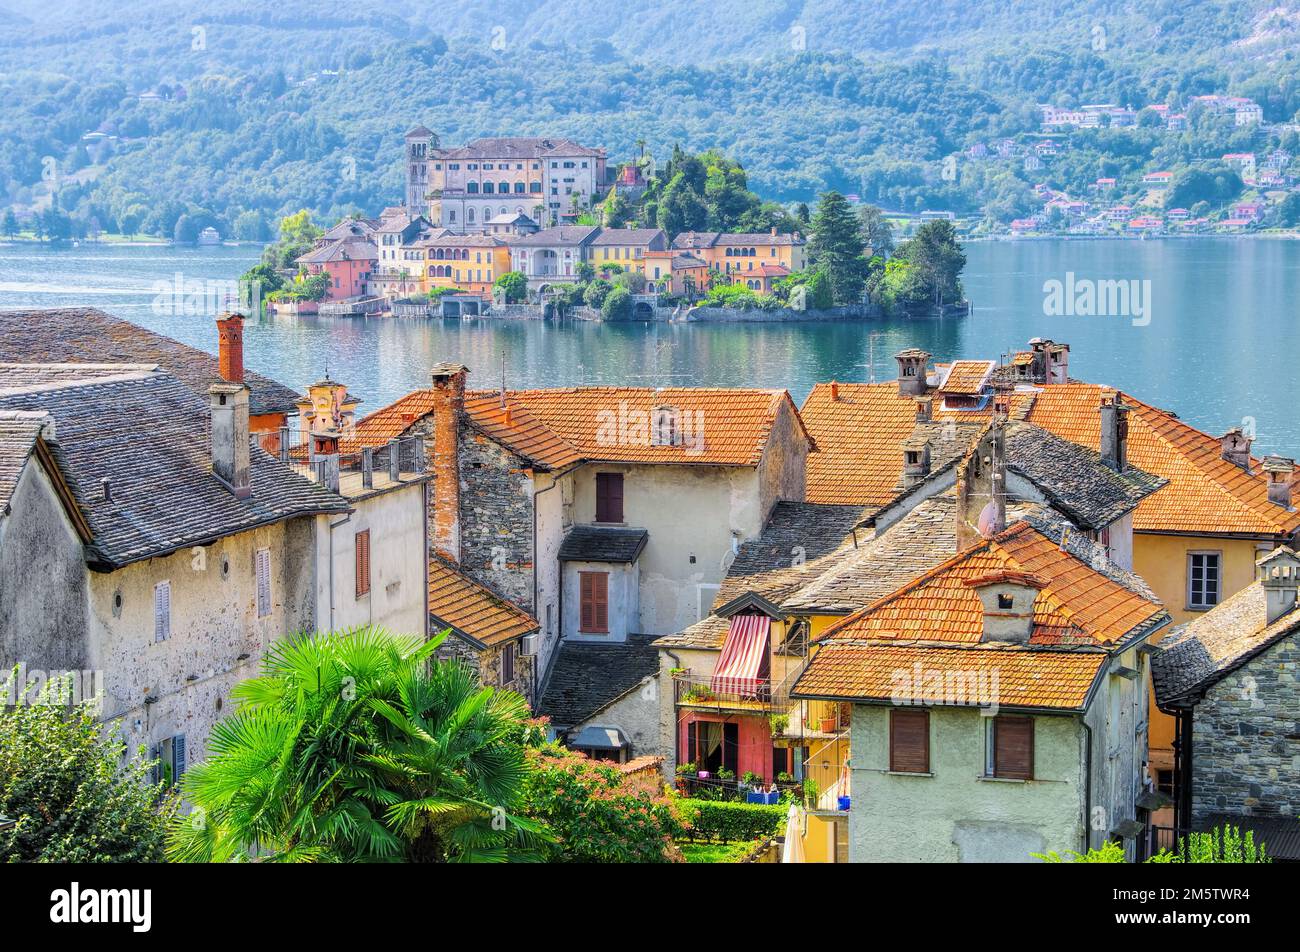 View of the island Isola San Giulio at the Lake Orta in Italy Stock Photo